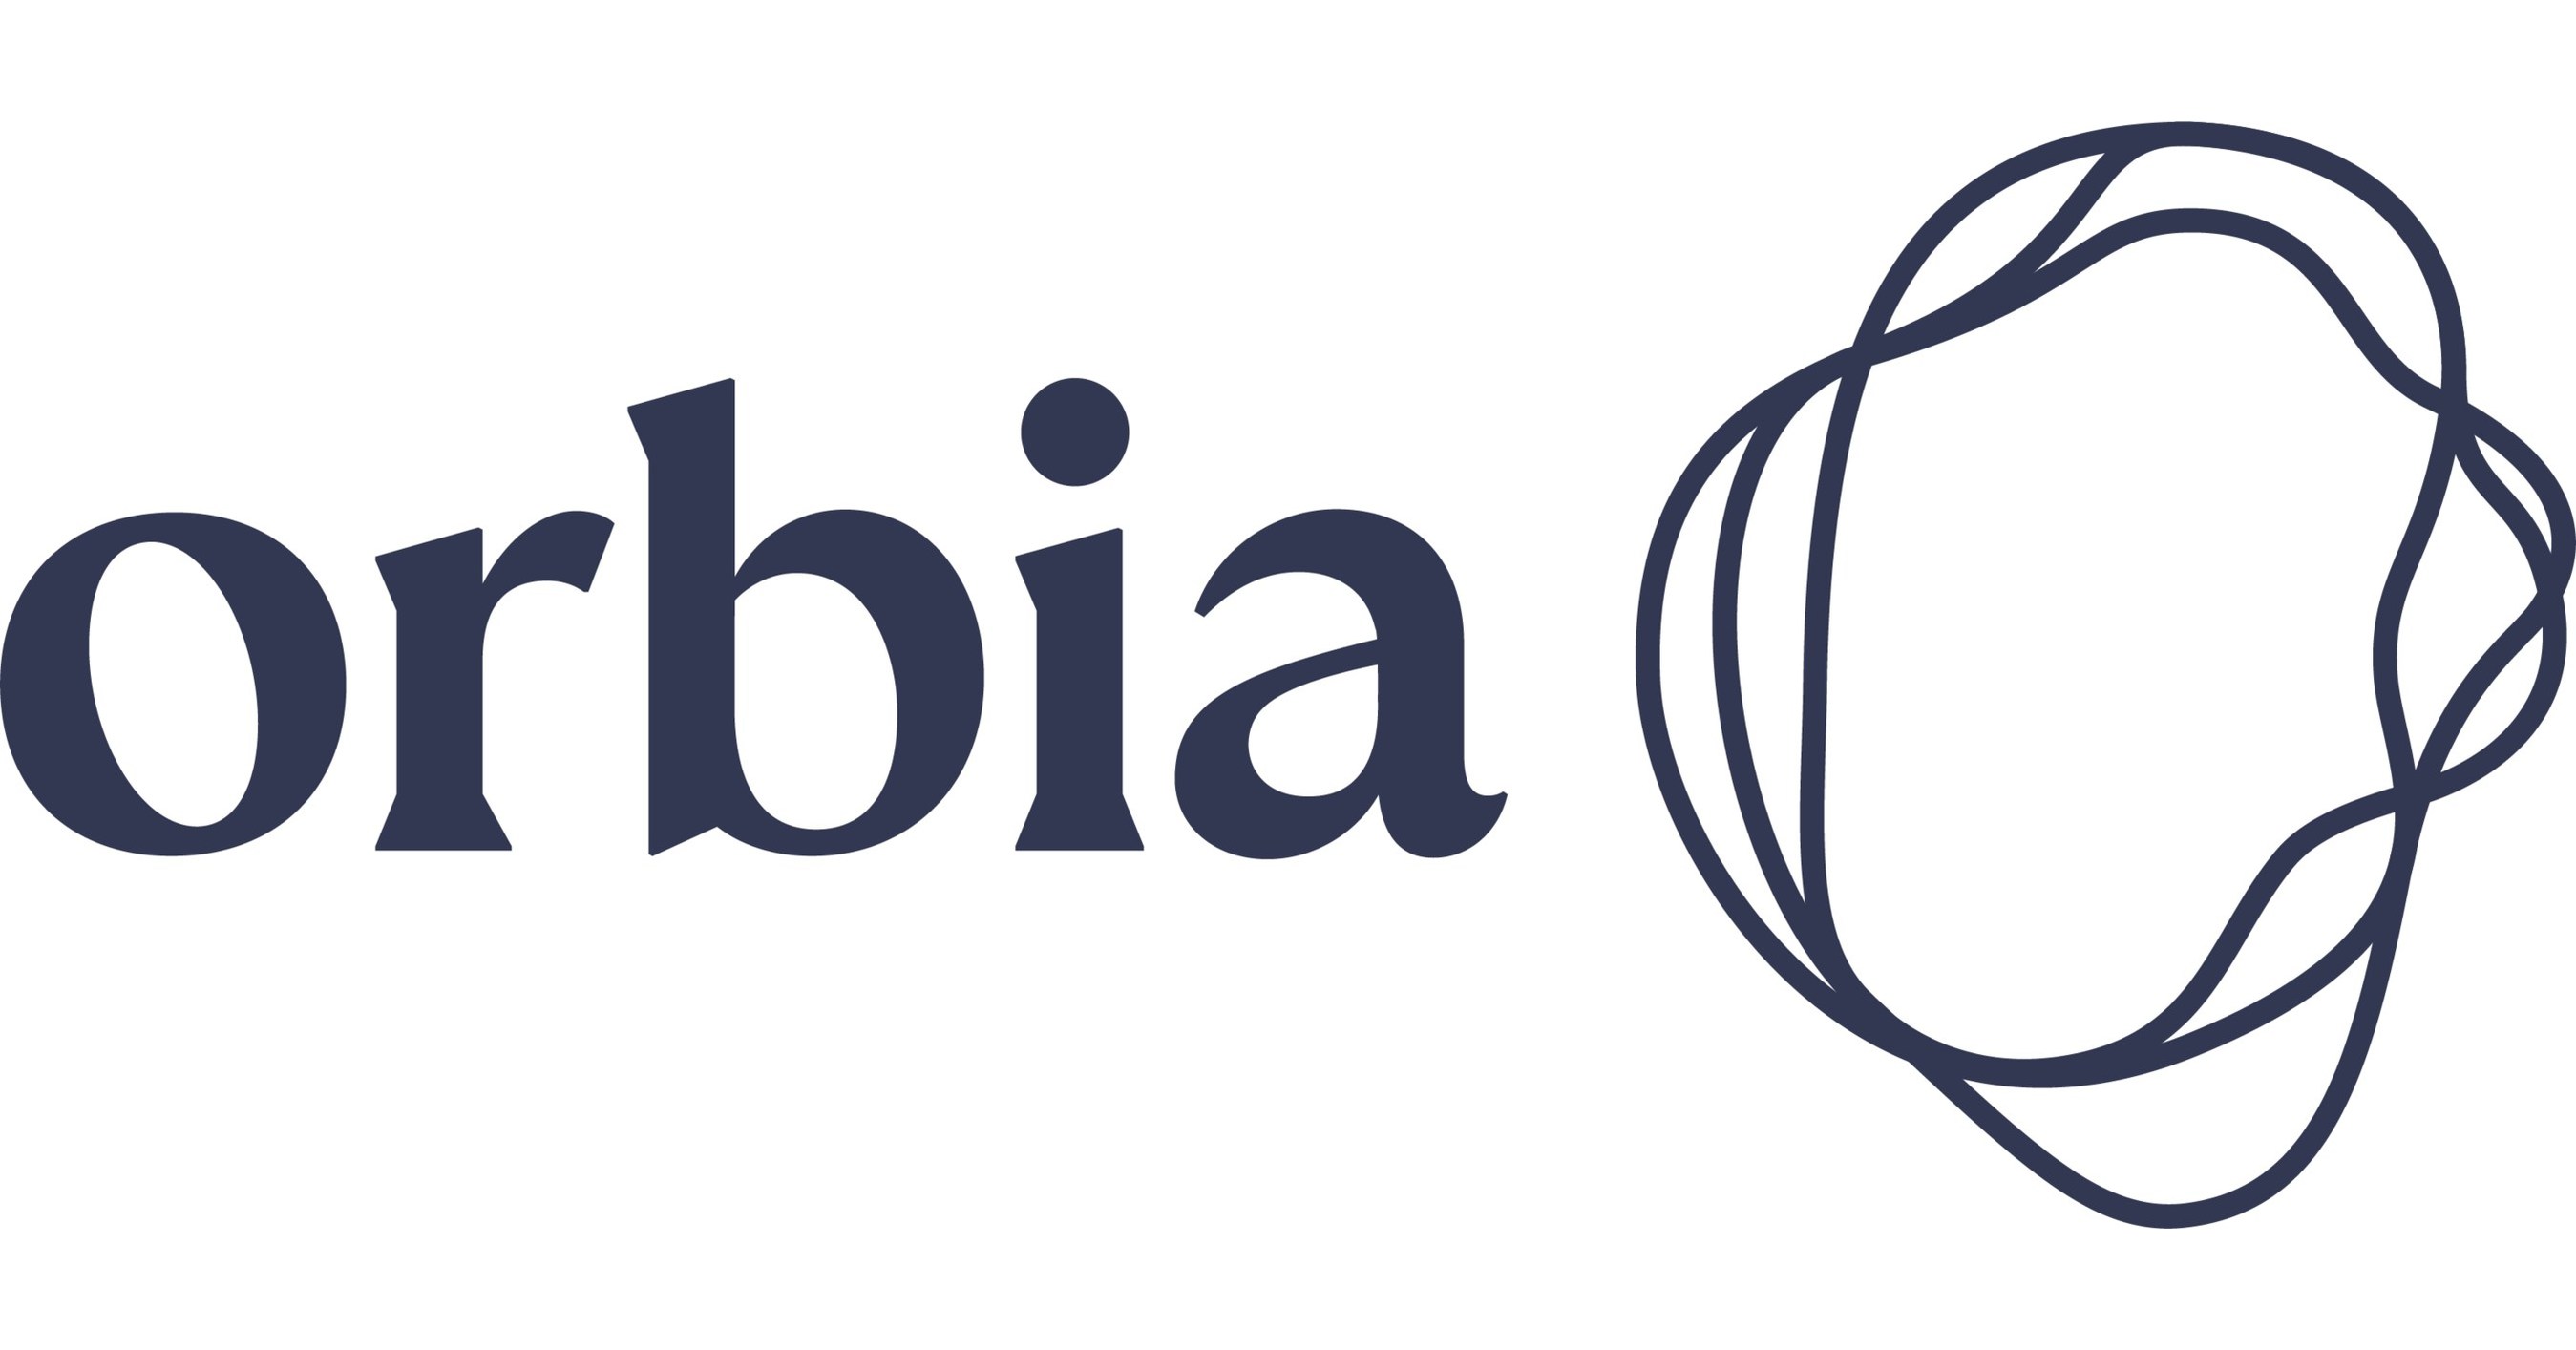 Orbia Commits To 1.5°C Emissions Reduction Target To Limit Climate Change Impact - PRNewswire